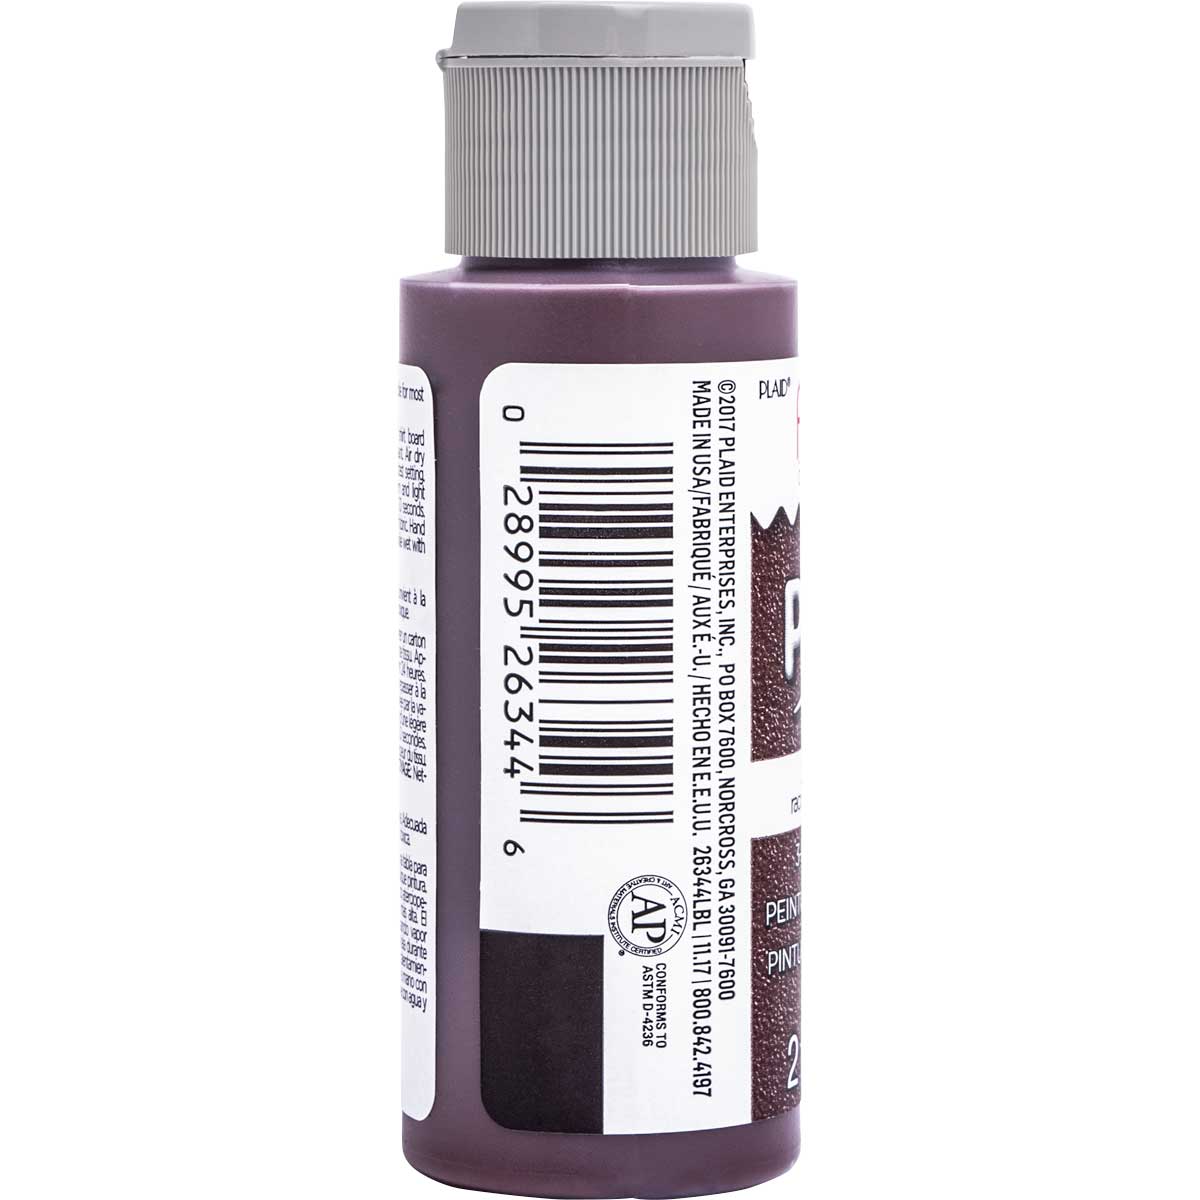 Fabric Creations™ Plush™ 3-D Fabric Paints - Rootbeer, 2 oz. - 26344